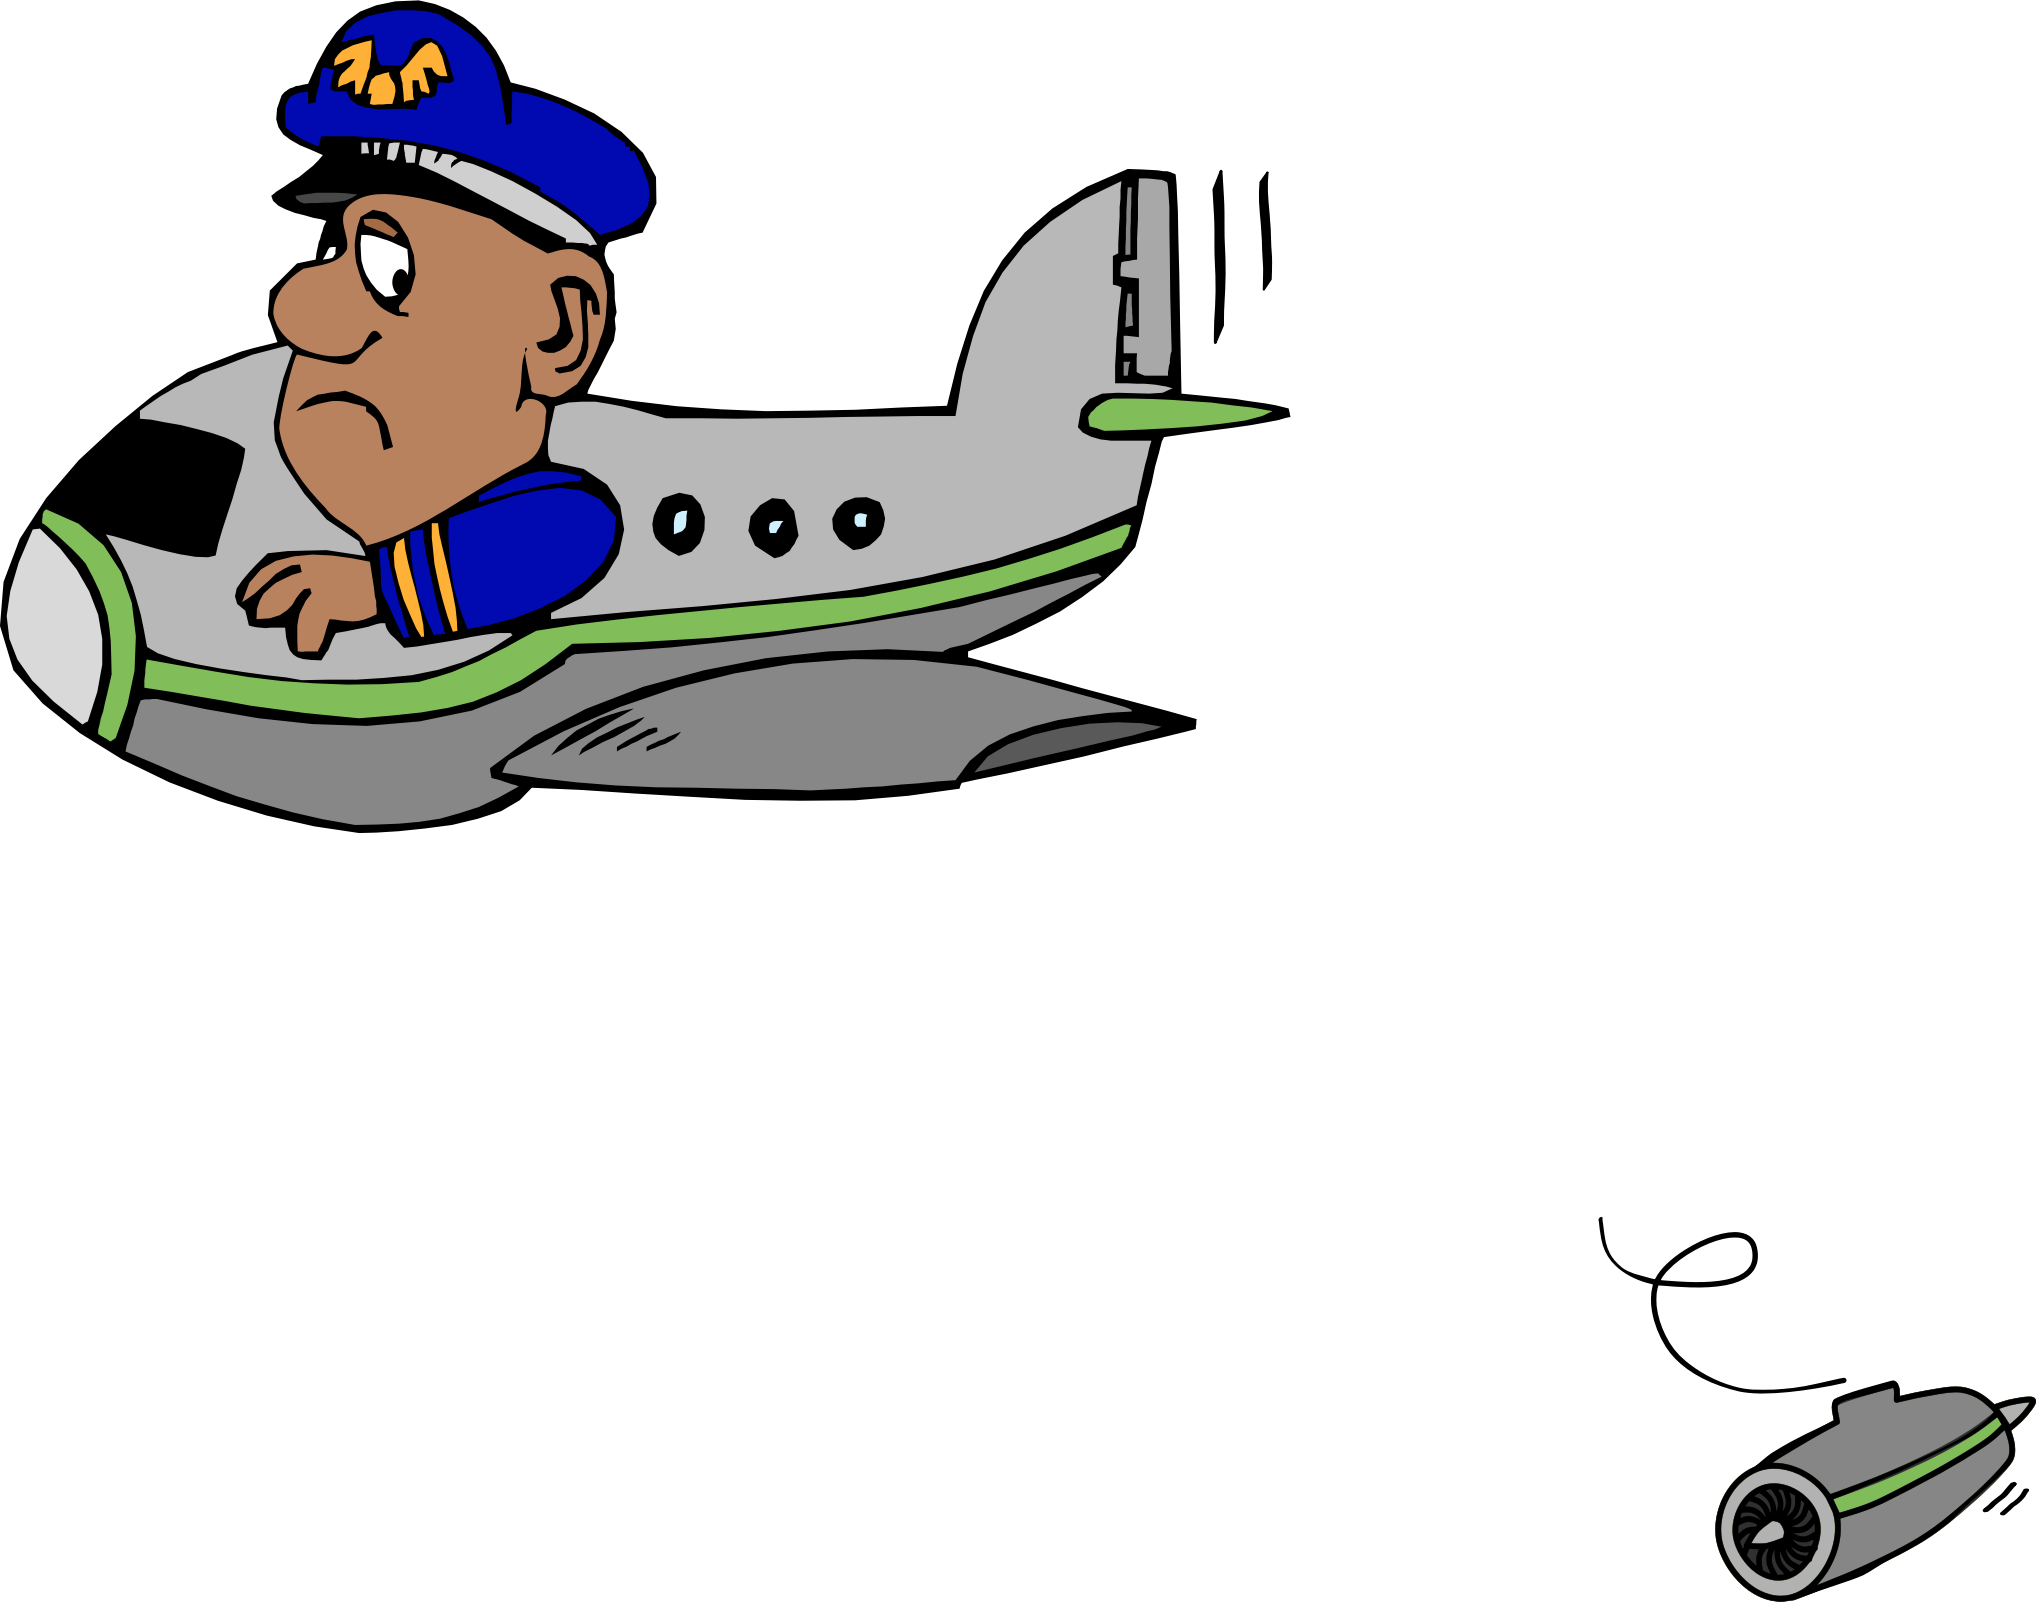 Download Airplane 0506147919 Fighter Pilot Cartoon Drawing - Plane Funny  Clip Art PNG Image with No Background 